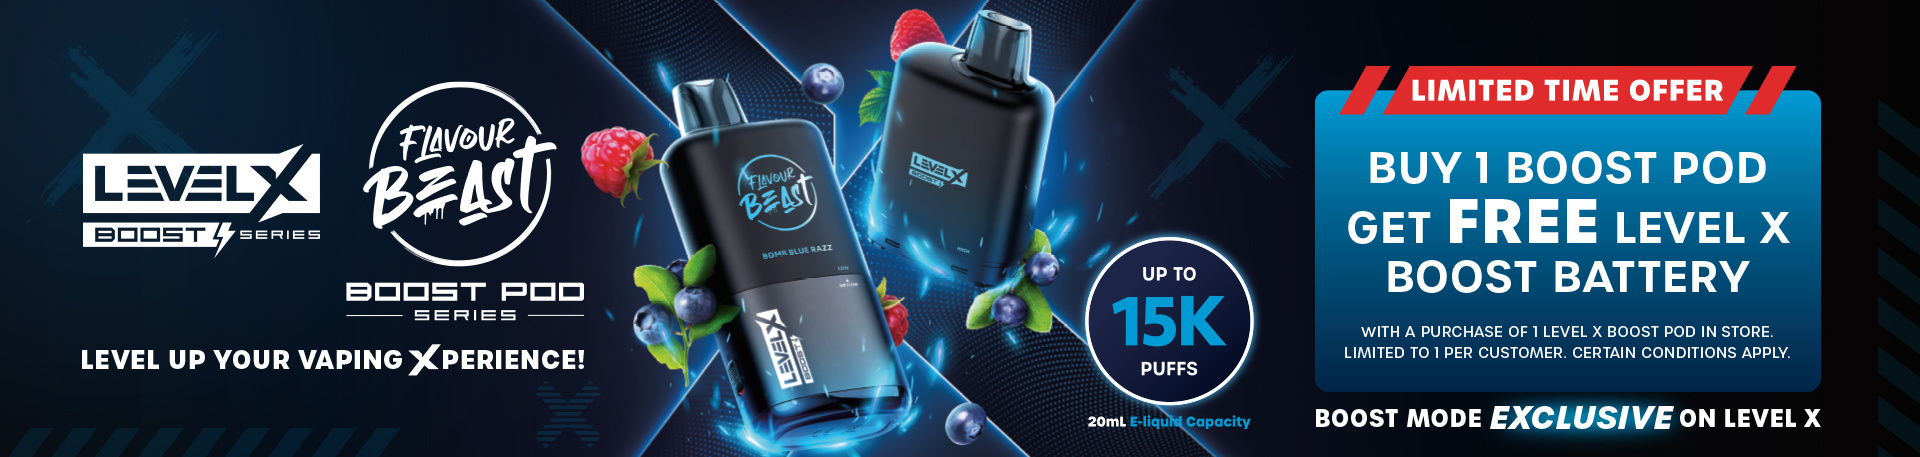 Free Boost Battery with Purchase of Boost Pod (While Supplies Last)